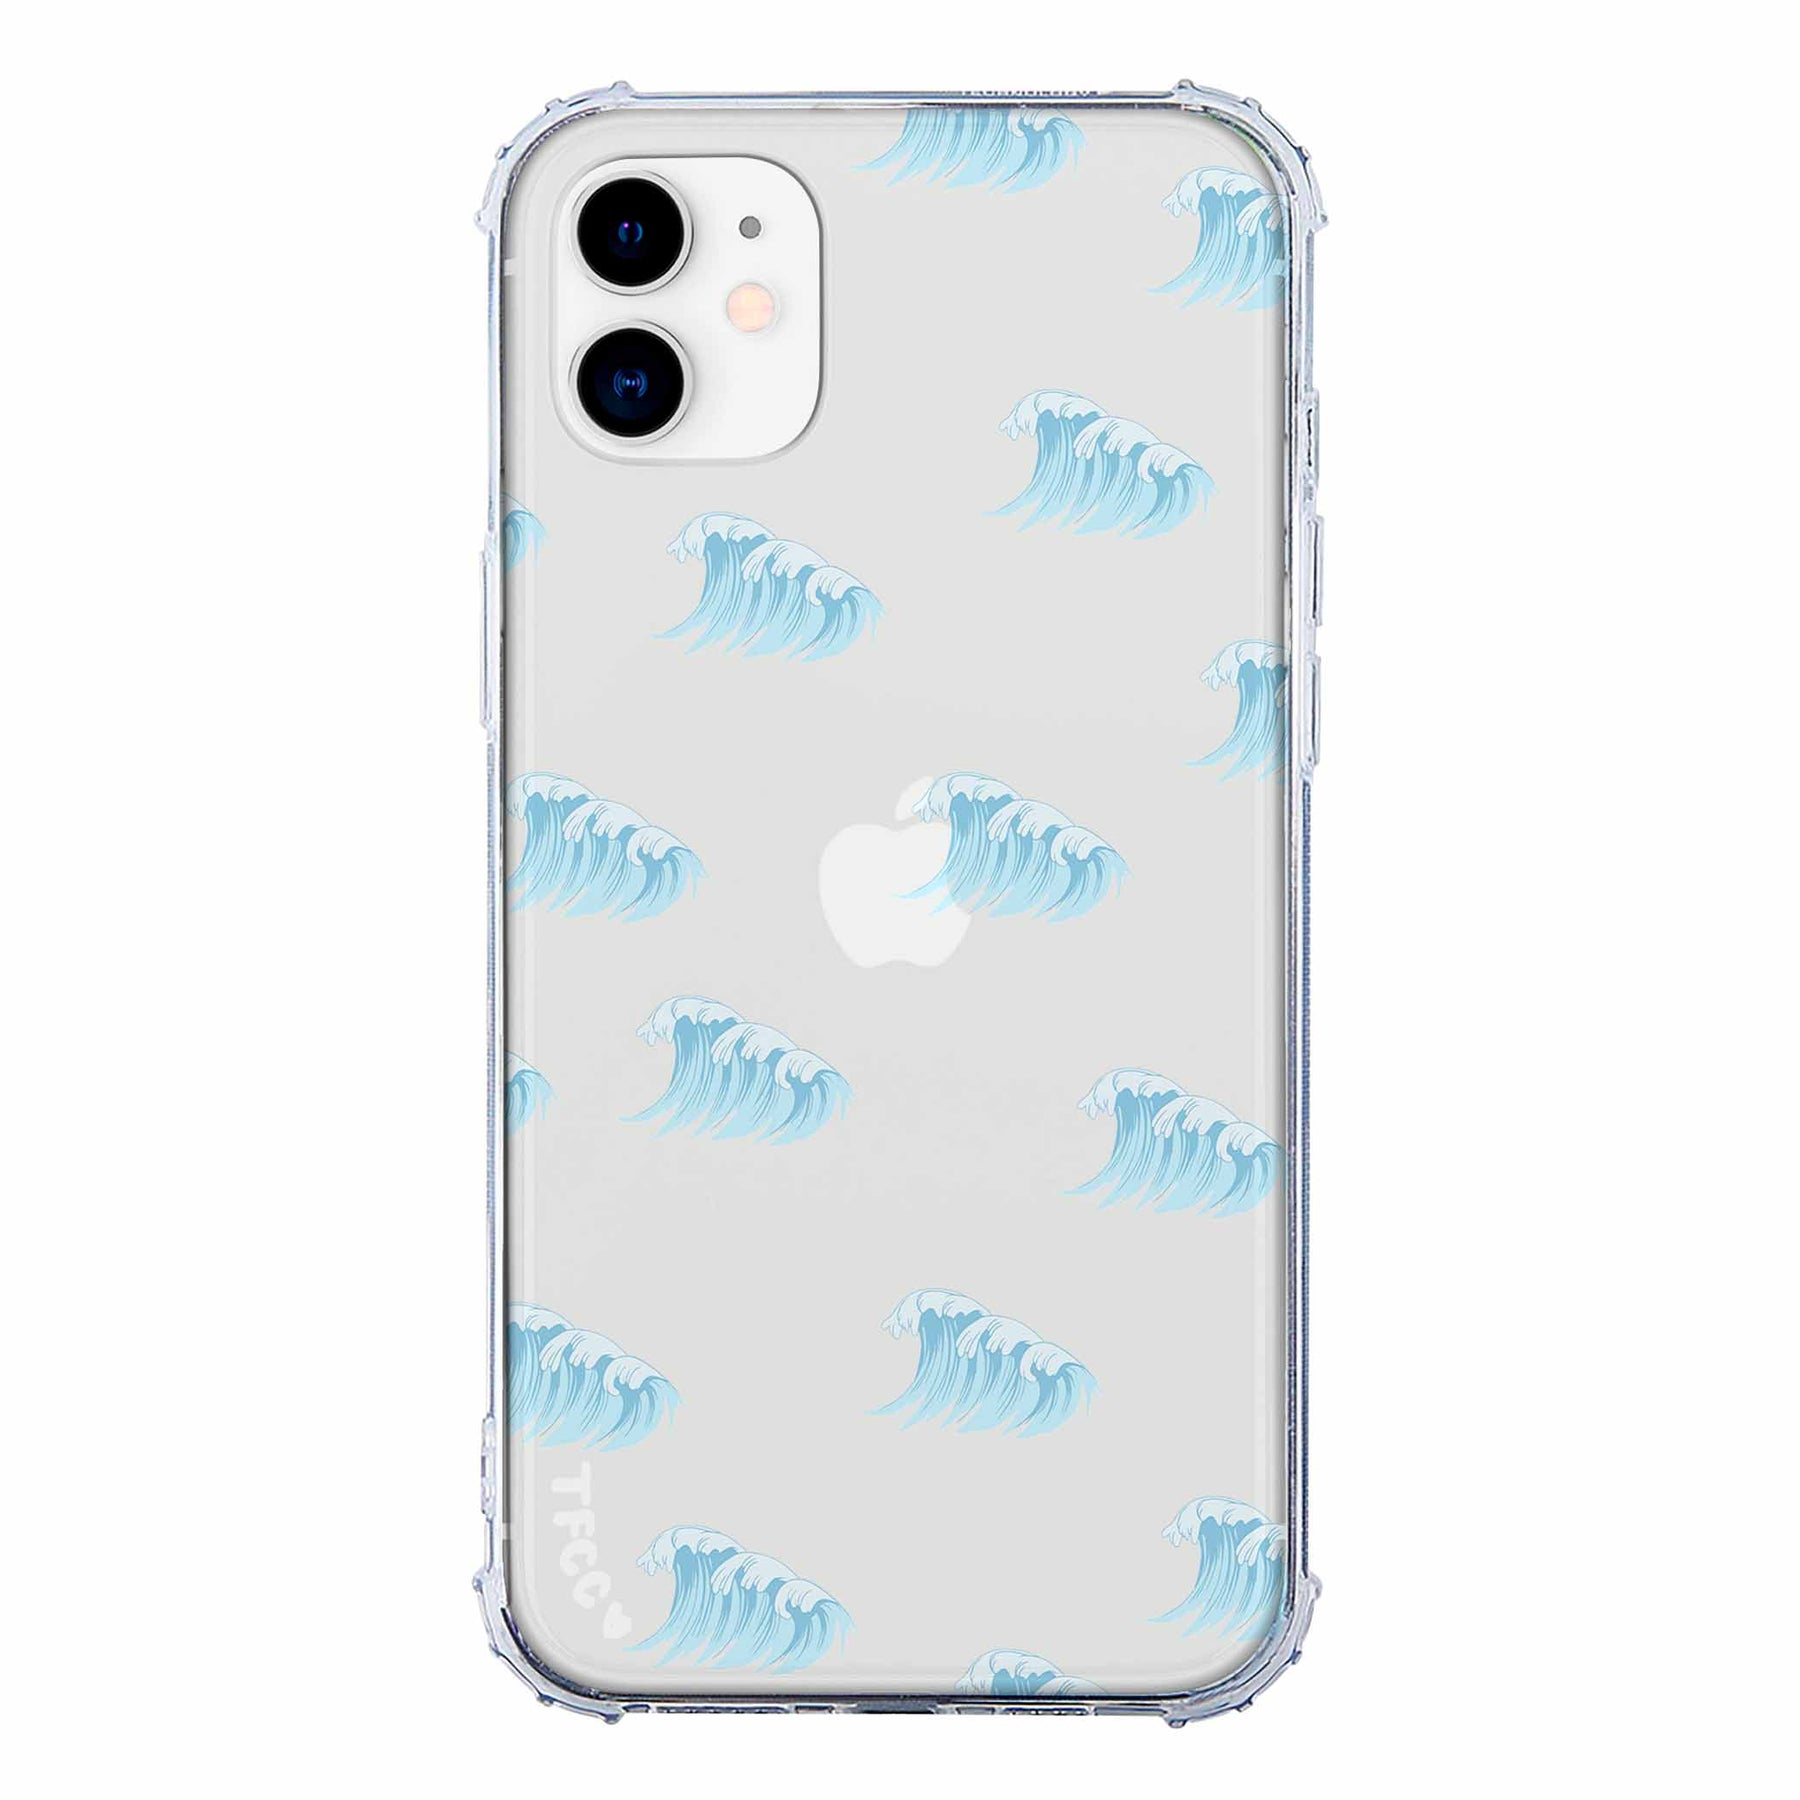 OCEAN WAVES CLEAR CASE - thefonecasecompany